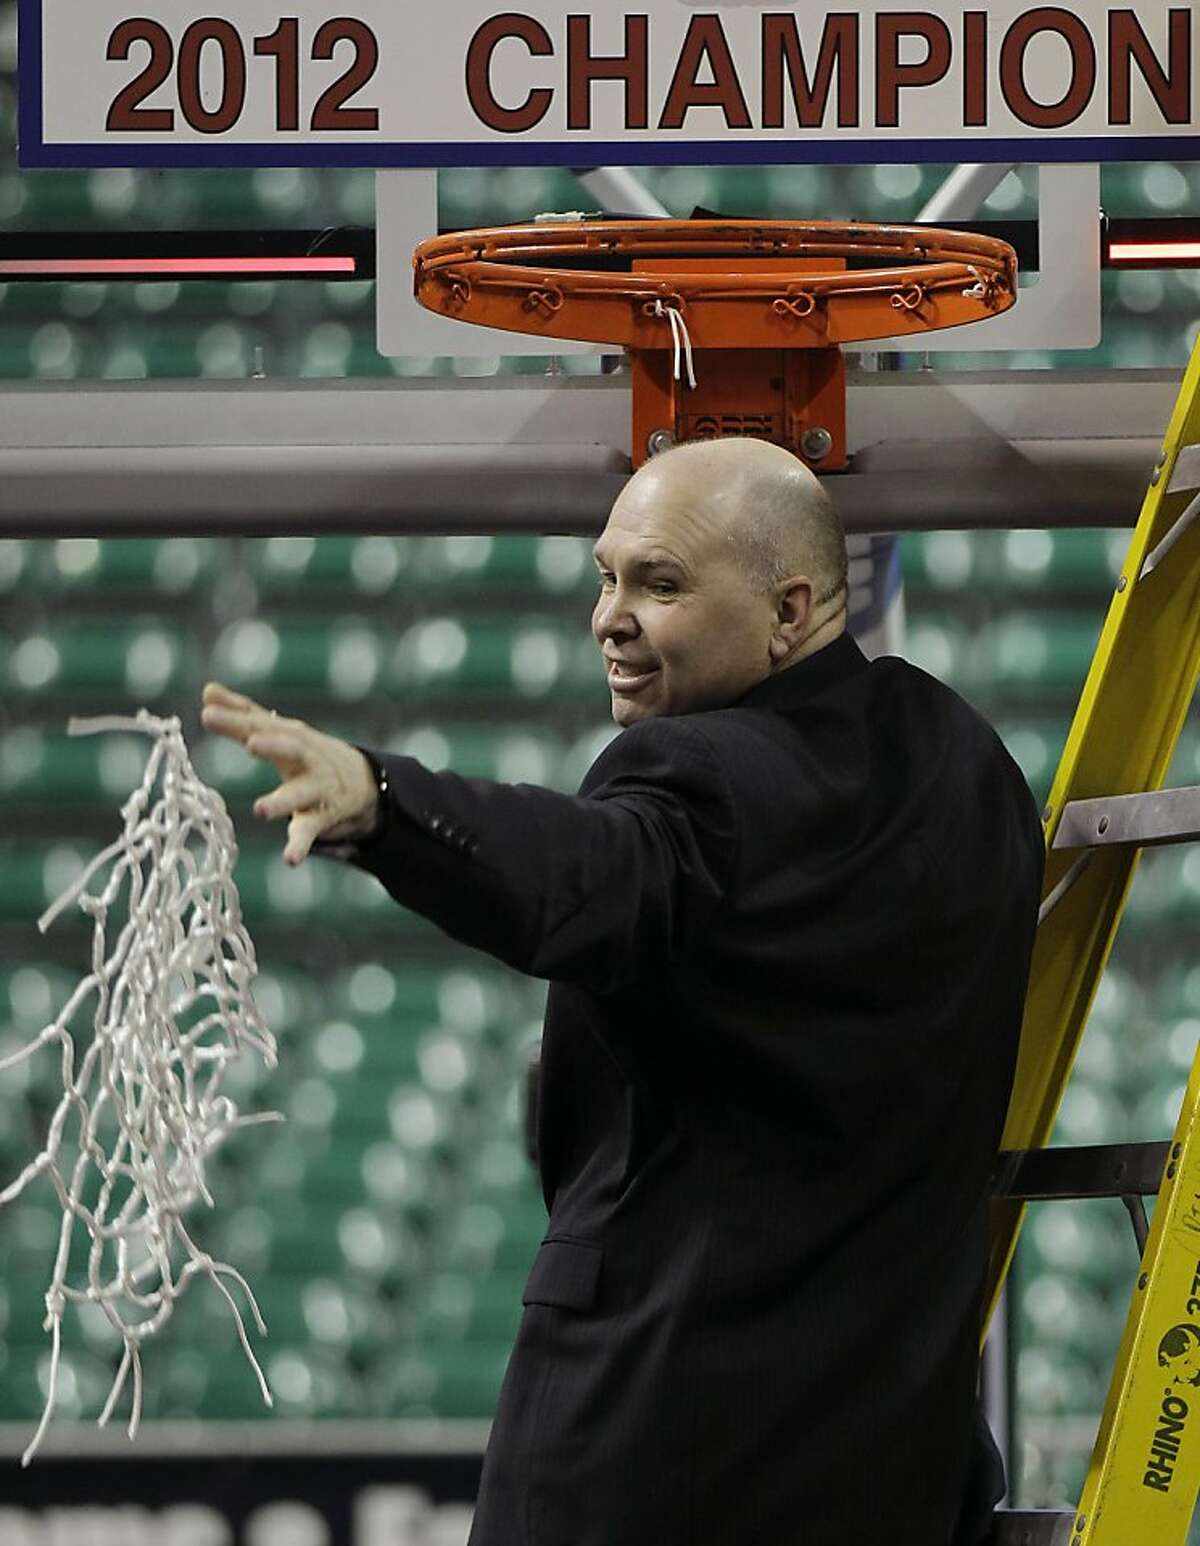 FILE - In this March 5, 2012, file photo, Saint Mary's coach Randy Bennett throws the net to his players after cutting it down after beating Gonzaga 78-74 in overtime in an NCAA college basketball game in the championship of the West Coast Conference tournament in Las Vegas. (AP Photo/Julie Jacobson, File)